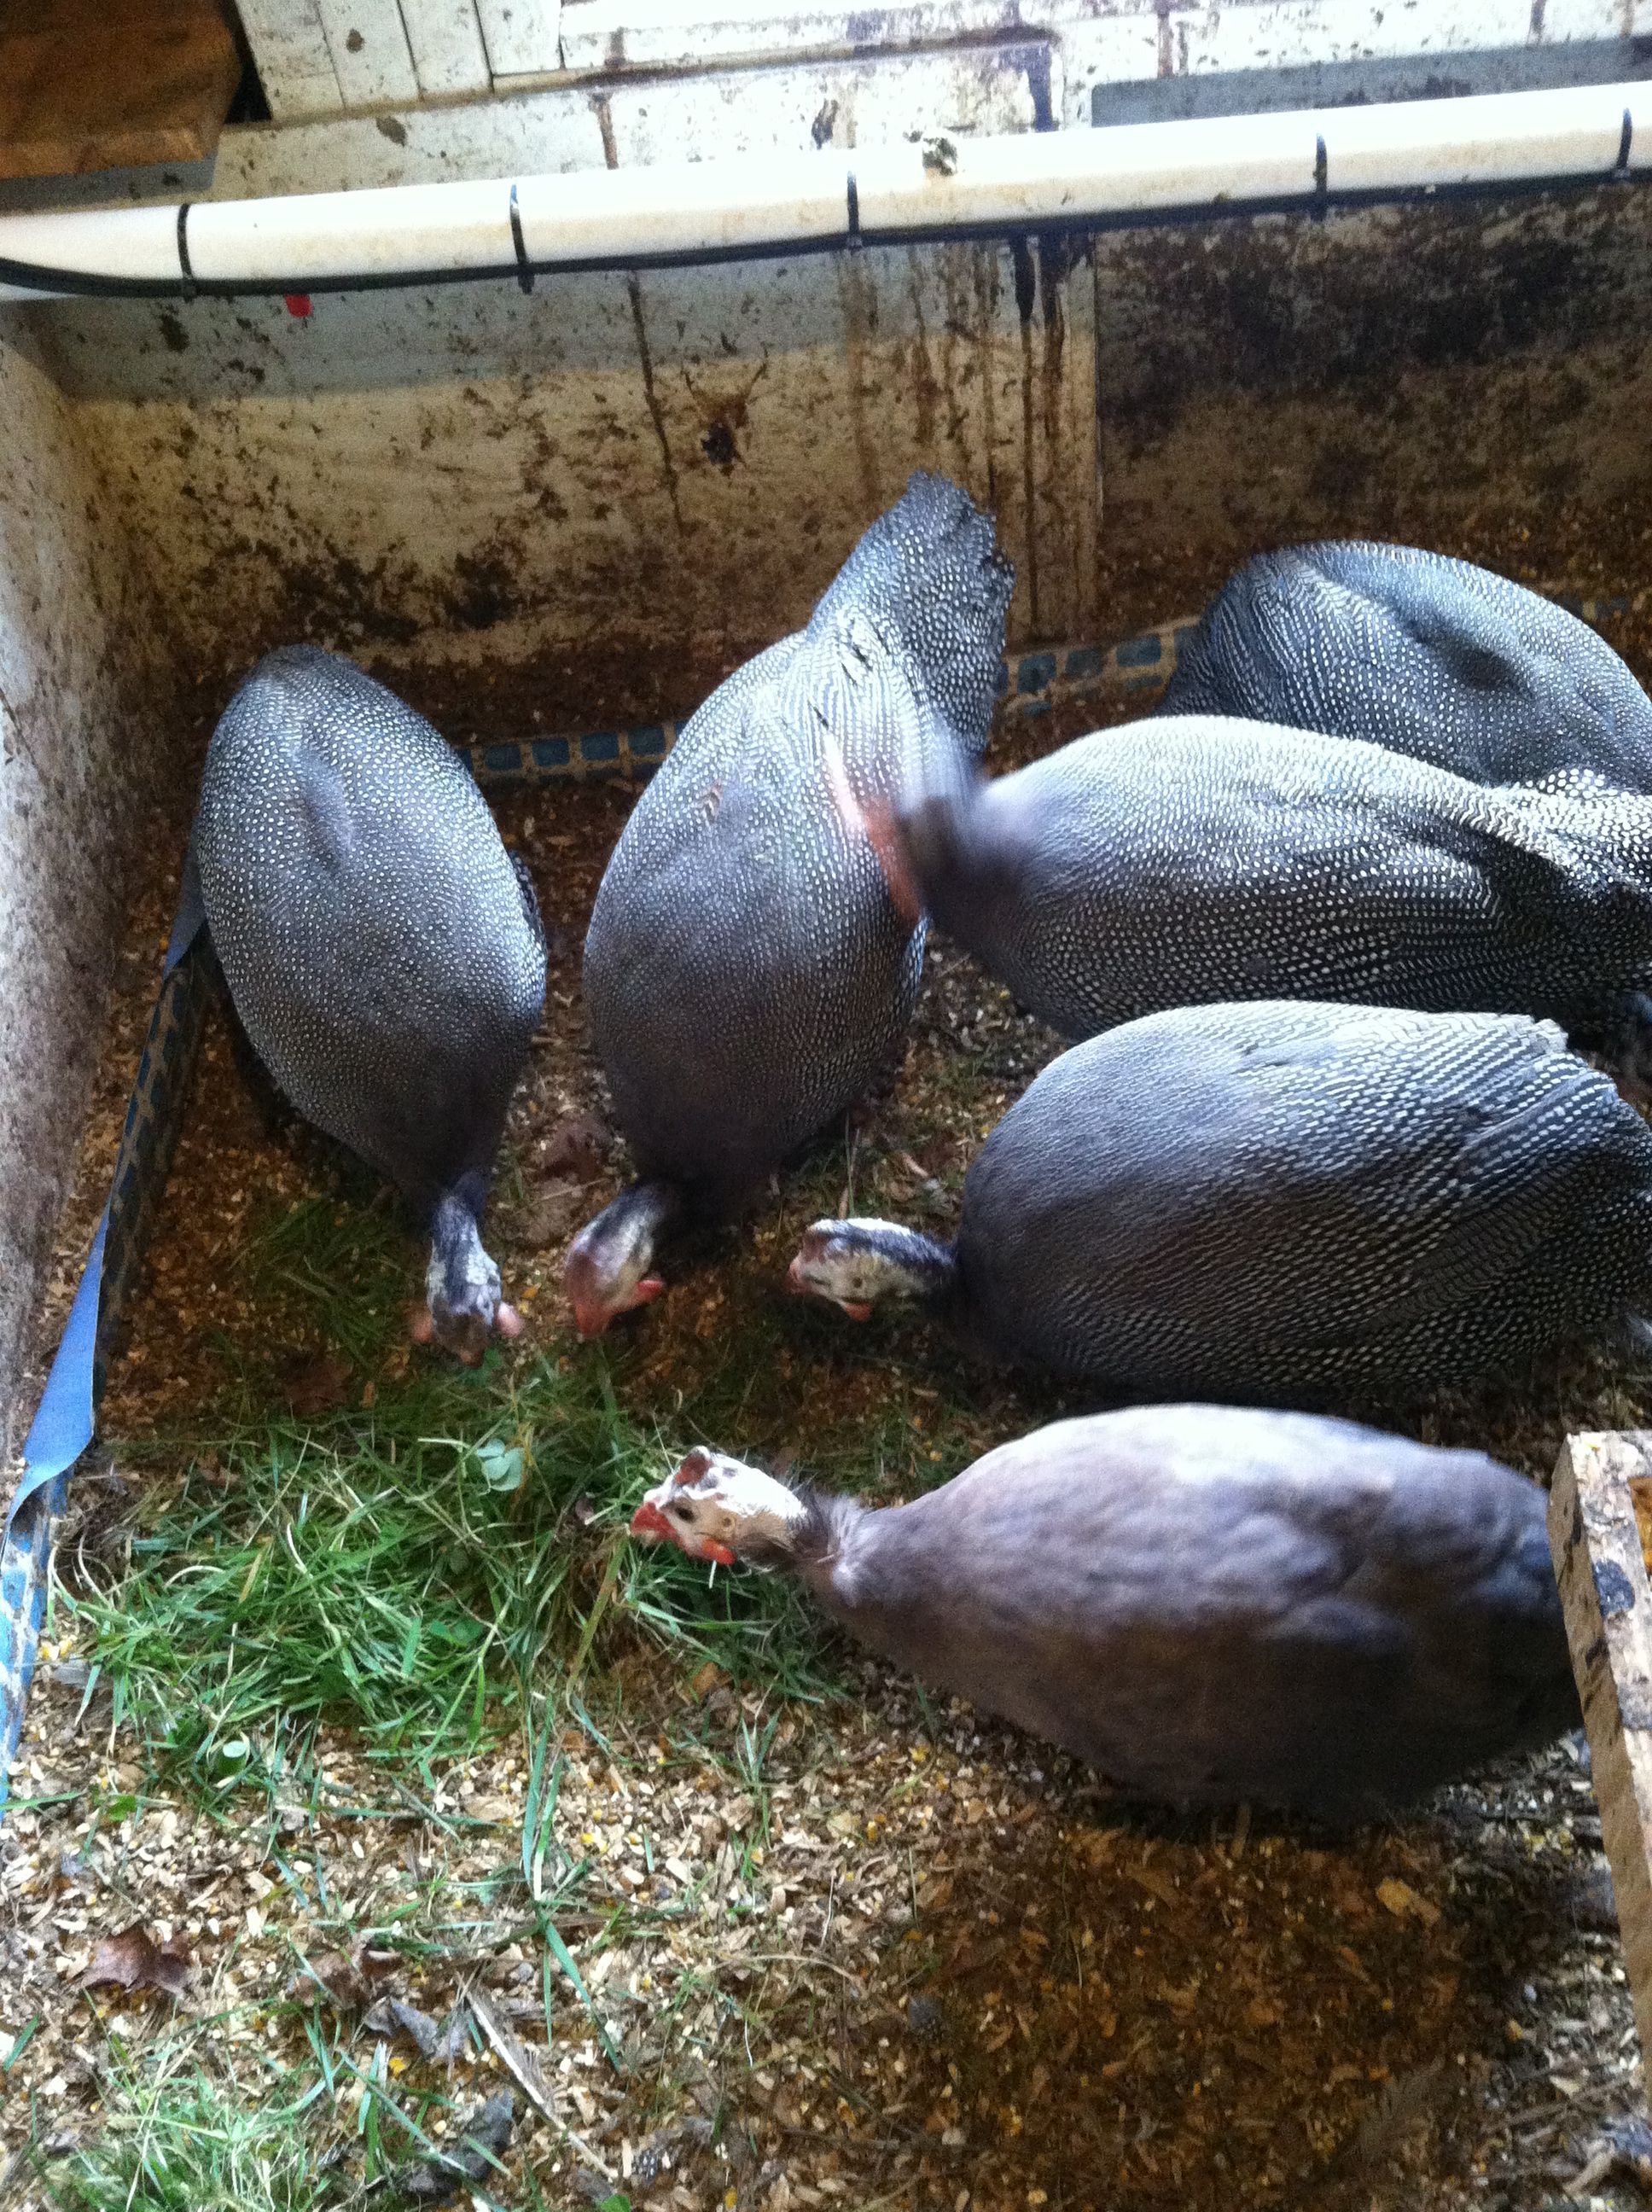 Violet Guinea in front and the others are Jumbo/French.